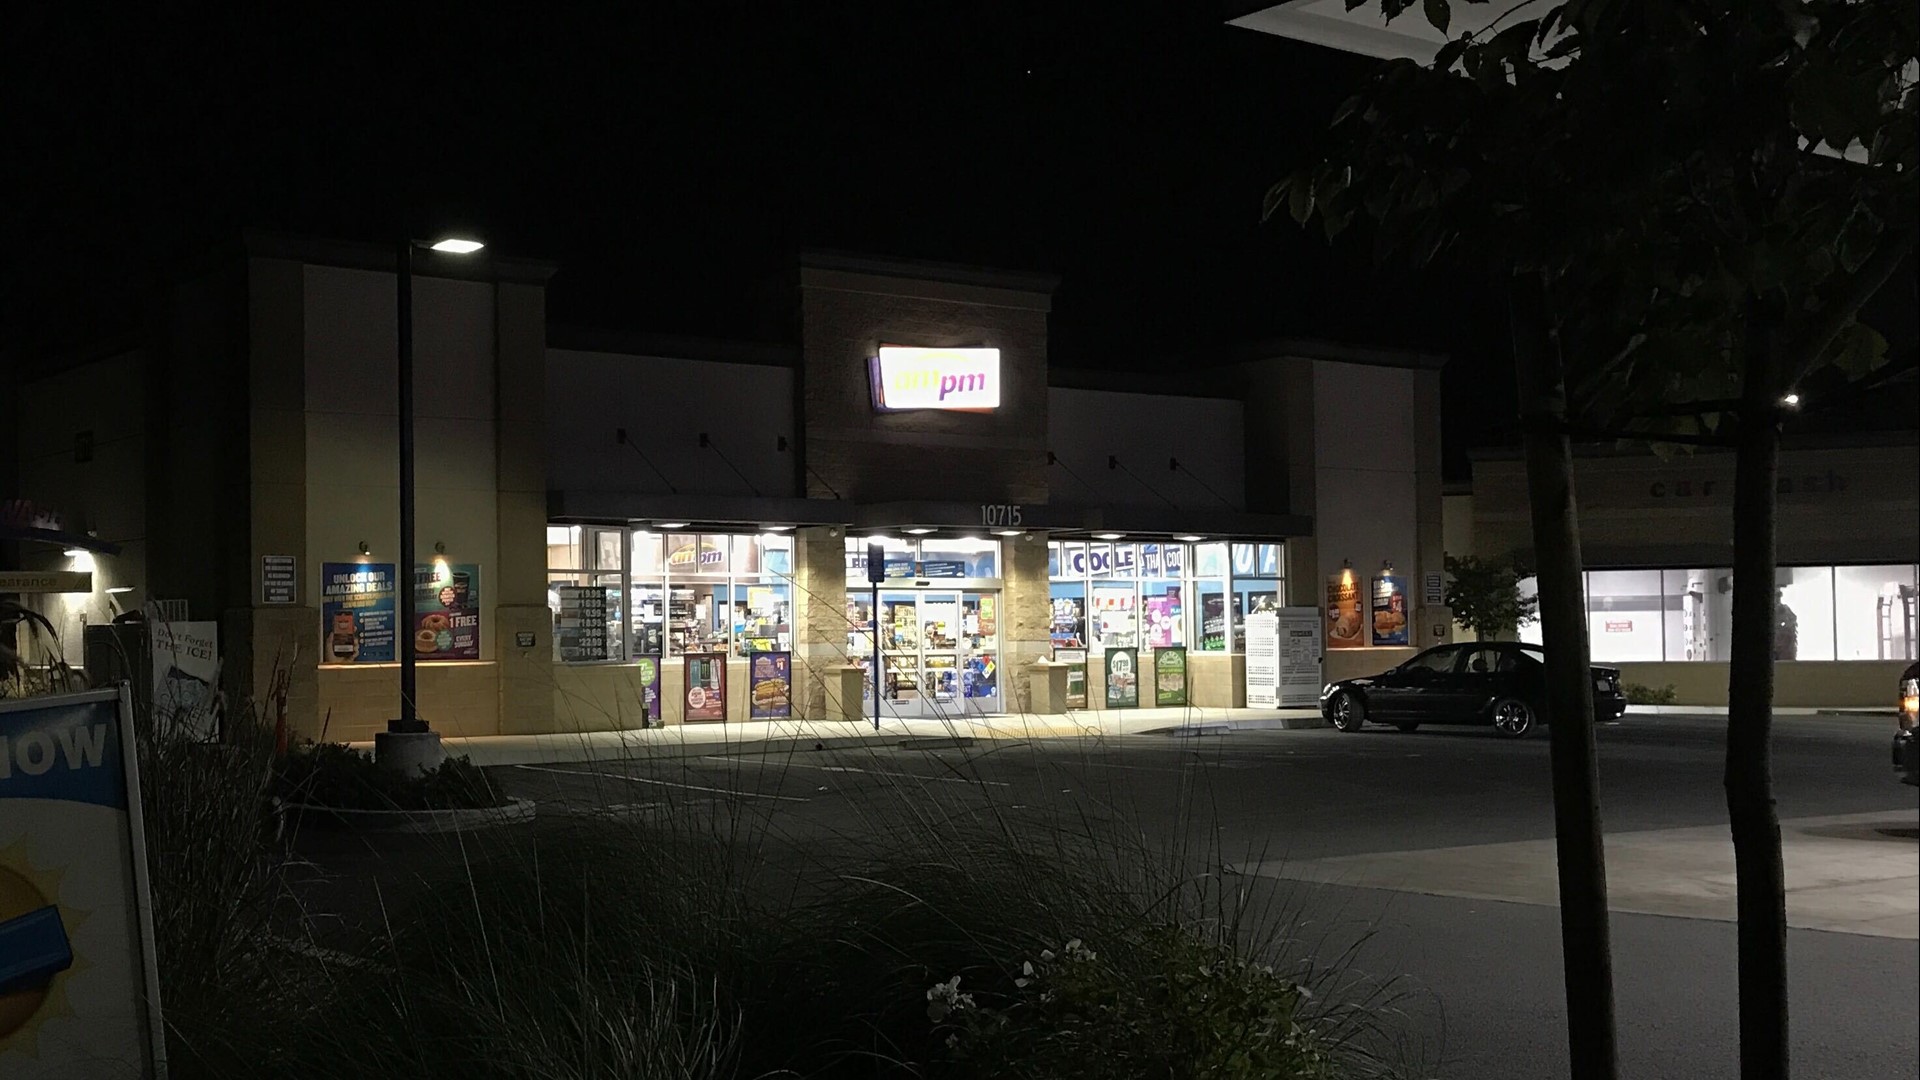 The incident started as a disturbance call around 7 a.m. at a store in the 10700 block of Trinity Parkway in Northern Stockton.